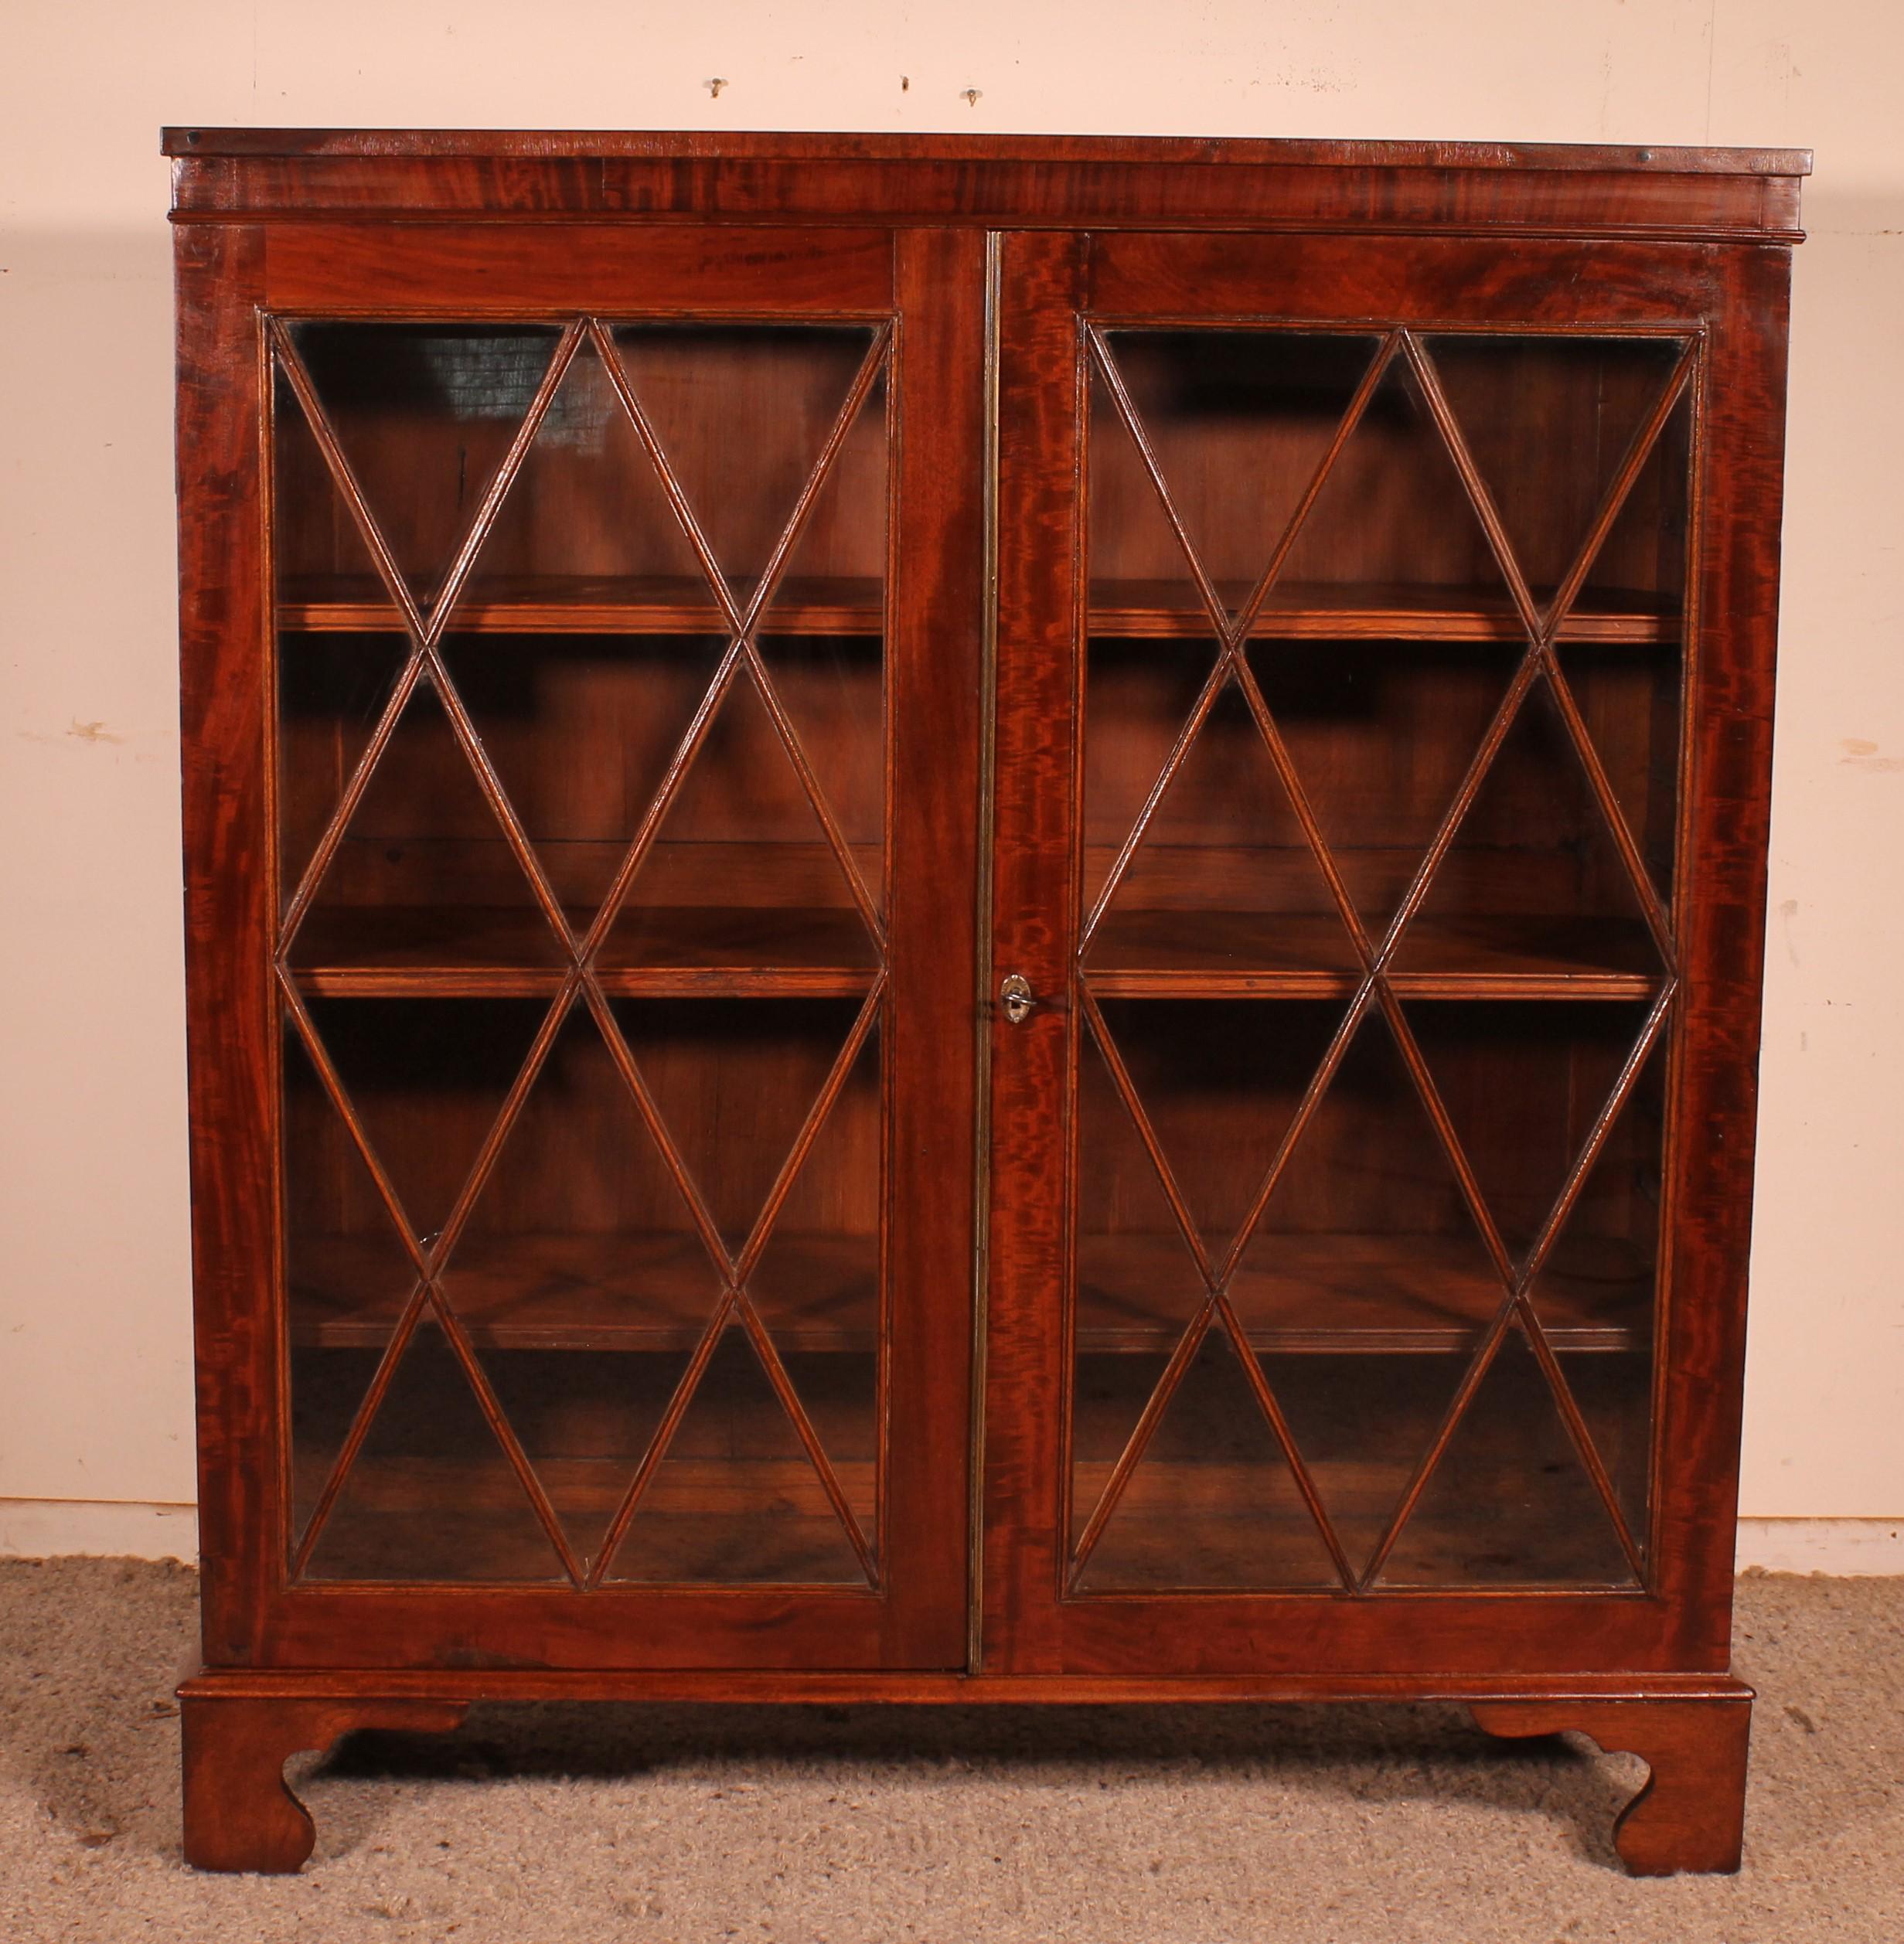 Lovely little mahogany display cabinet or glazed bookcase from the beginning of the 19th century of very good quality

Very beautiful English work in mahogany which stands out by its good quality and its two glazed doors with a brass rod in the